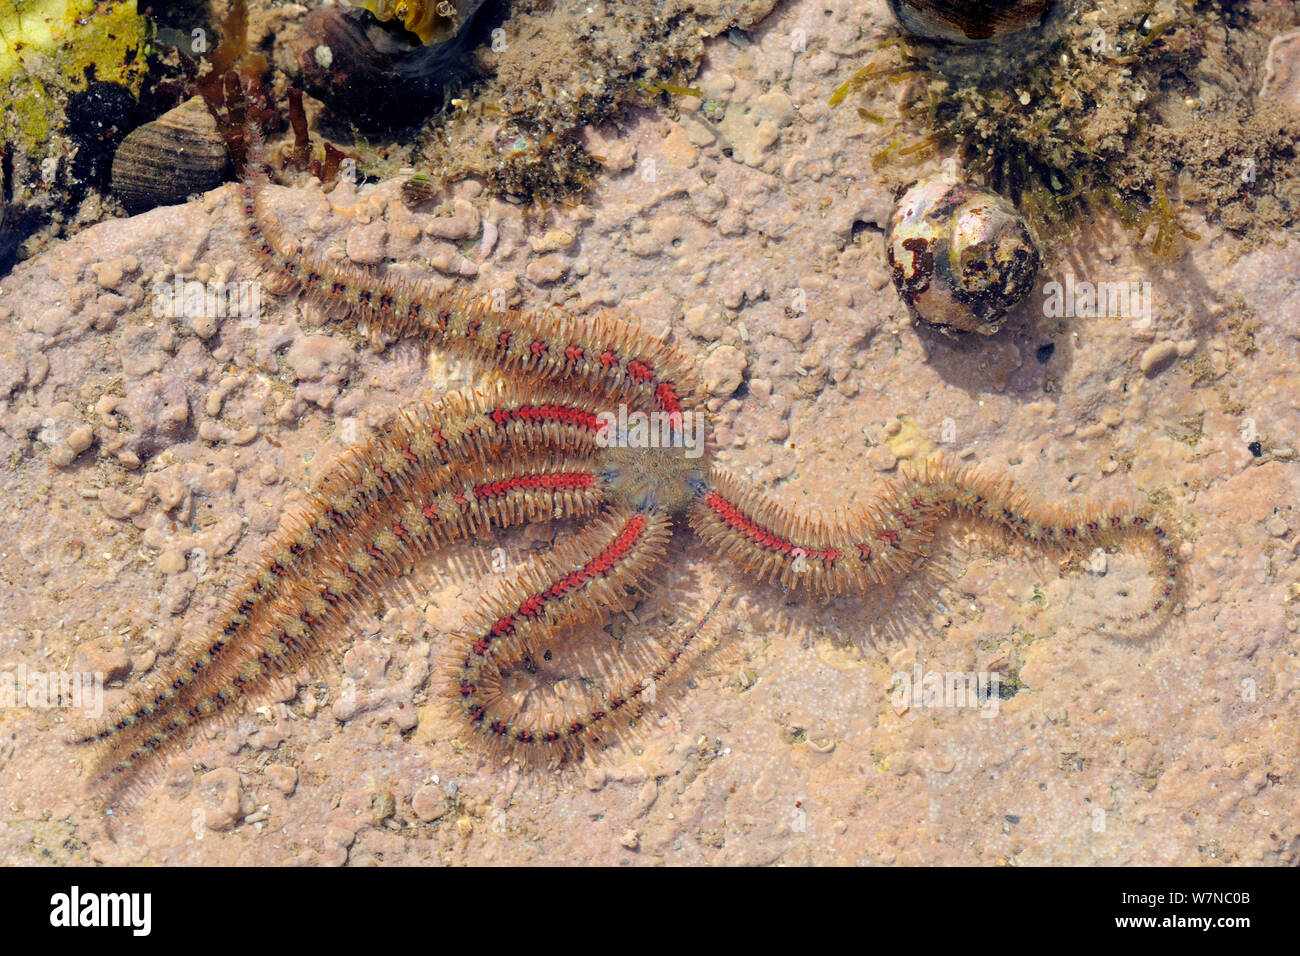 Common brittle star (Ophiothrix fragilis) moving over floor of rockpool encrusted with red algae past Common periwinkles (Littorina littorea) and Flat / Purple Top shell (Gibbula umbilicalis) low on a rocky shore, near Falmouth, Cornwall, UK, August. Stock Photo